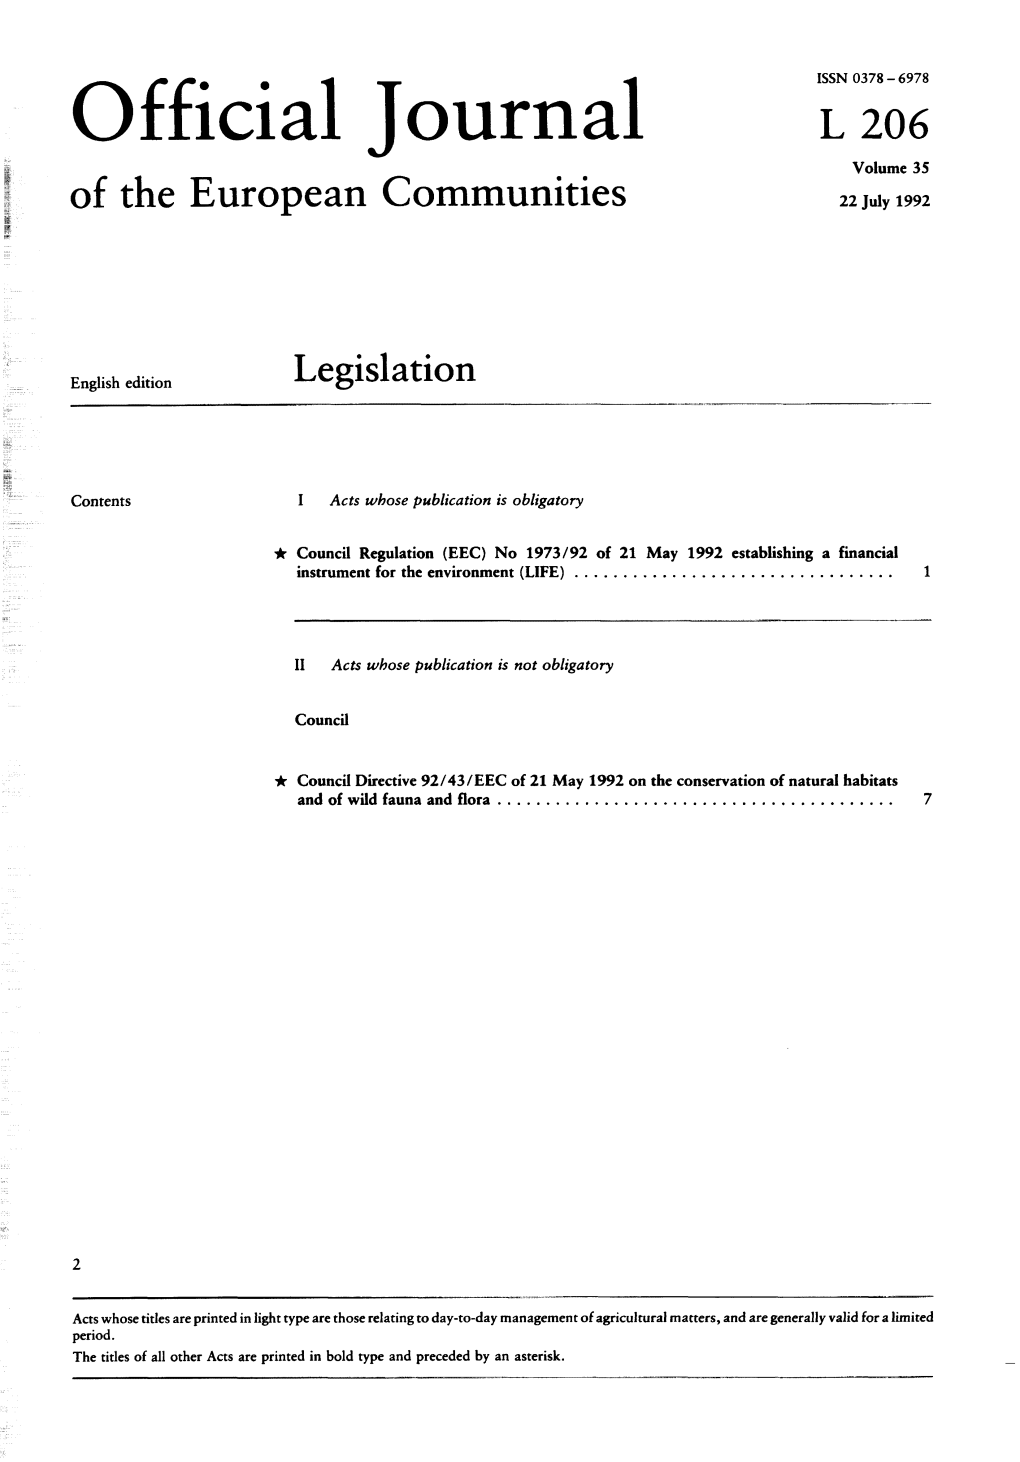 Official Journal L 206 Volume 35 of the European Communities 22 July 1992